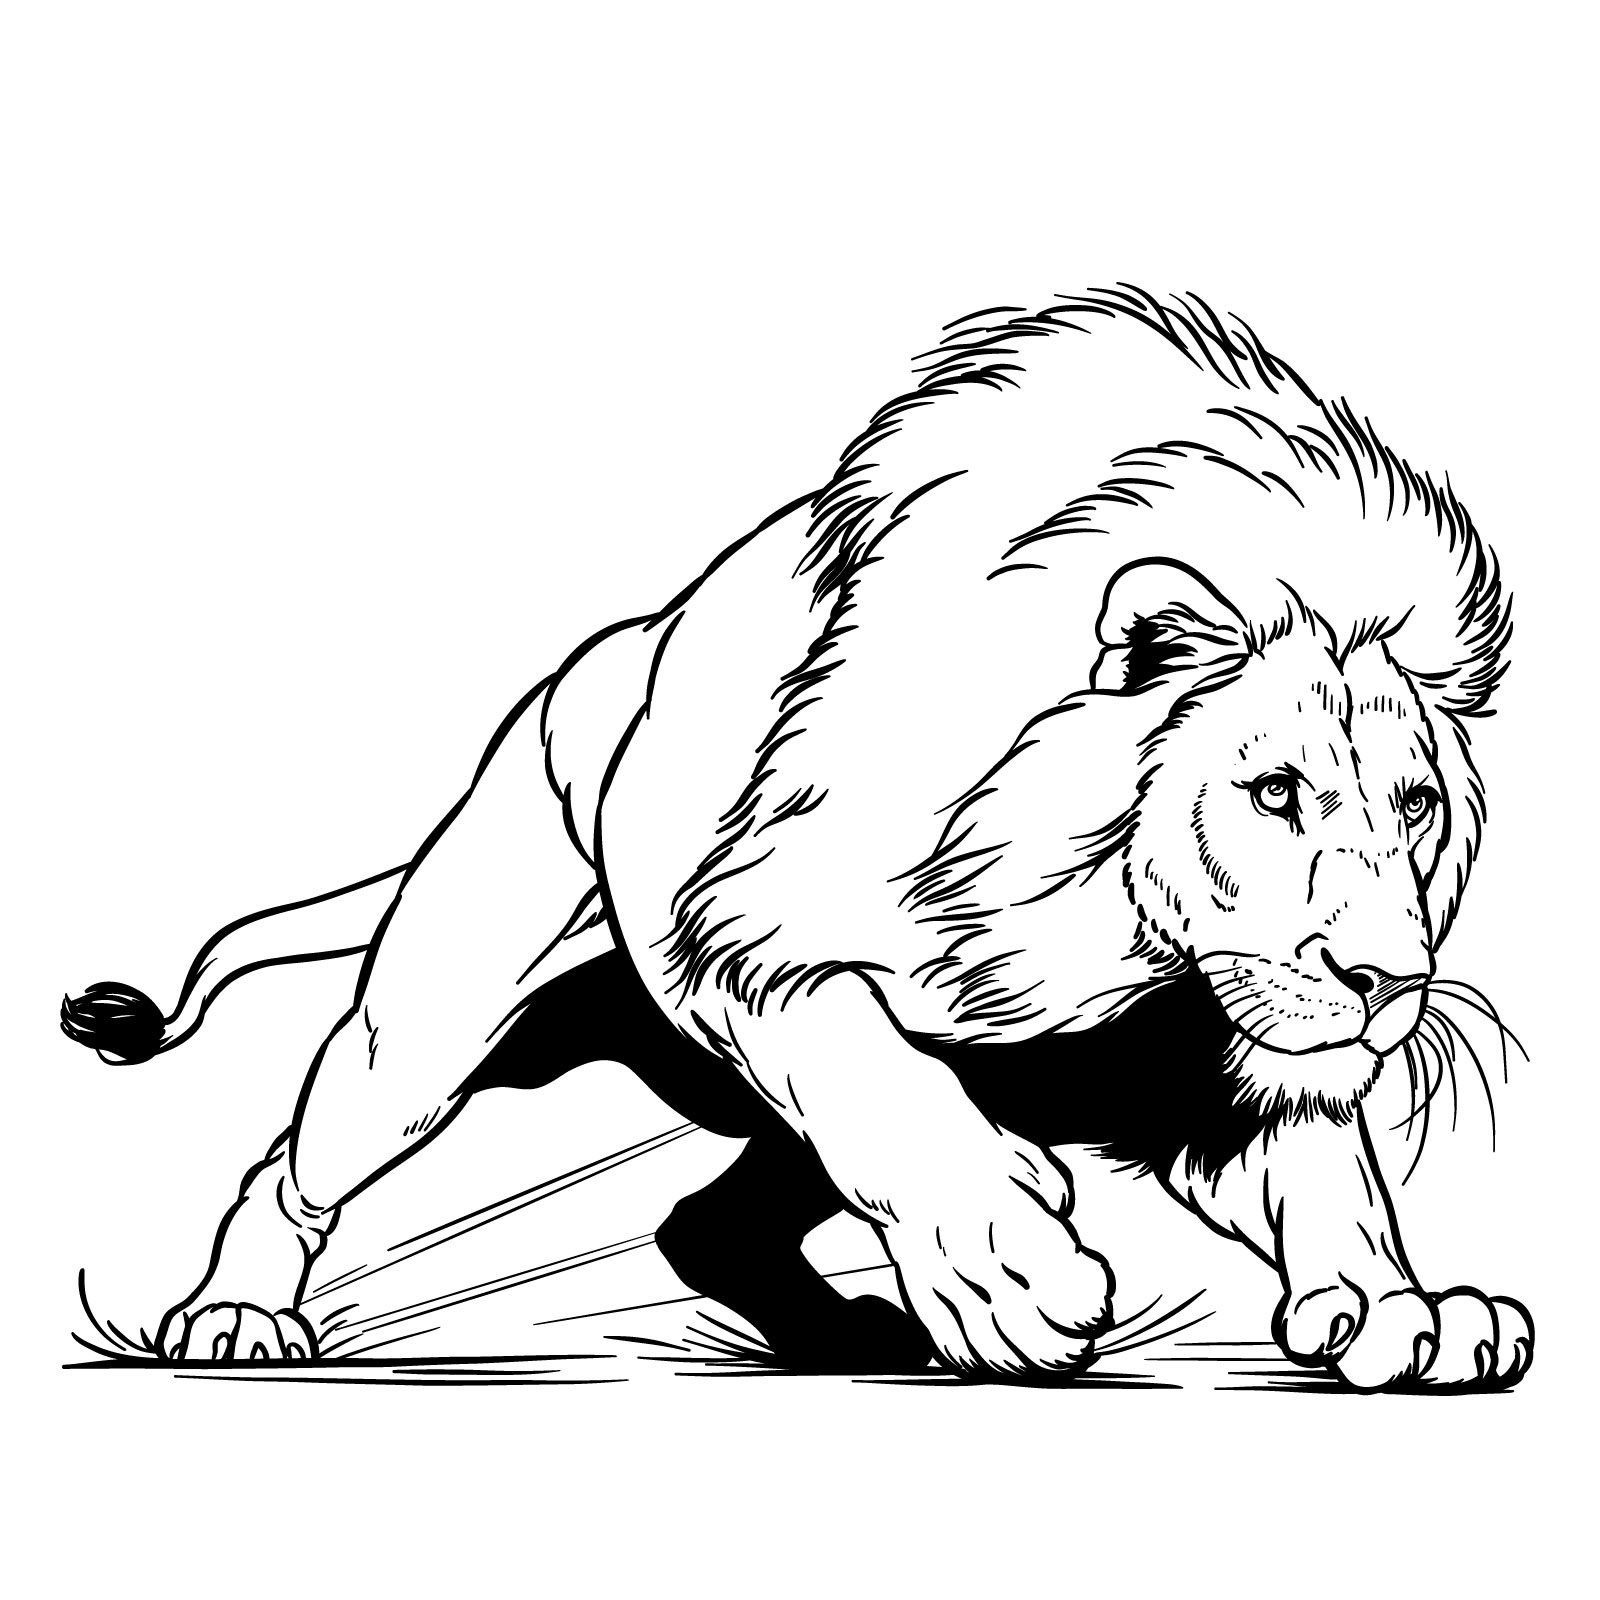 Fighting lion drawing - action pose sketch guide